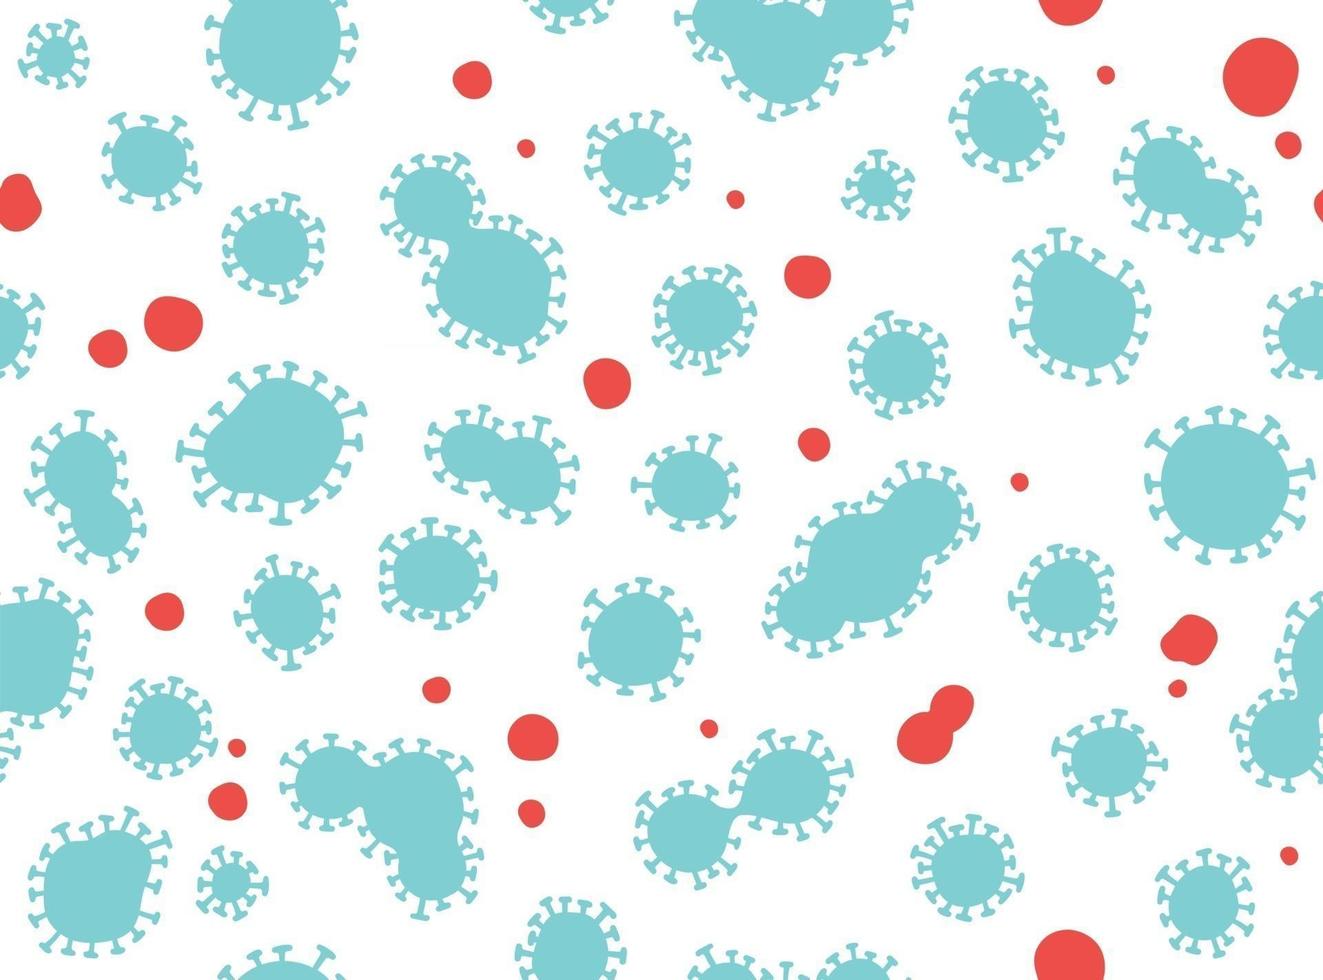 Infection illustration. Corona Virus COVID19 Seamless Vector Pattern Illustration Design, in blue and red colors.